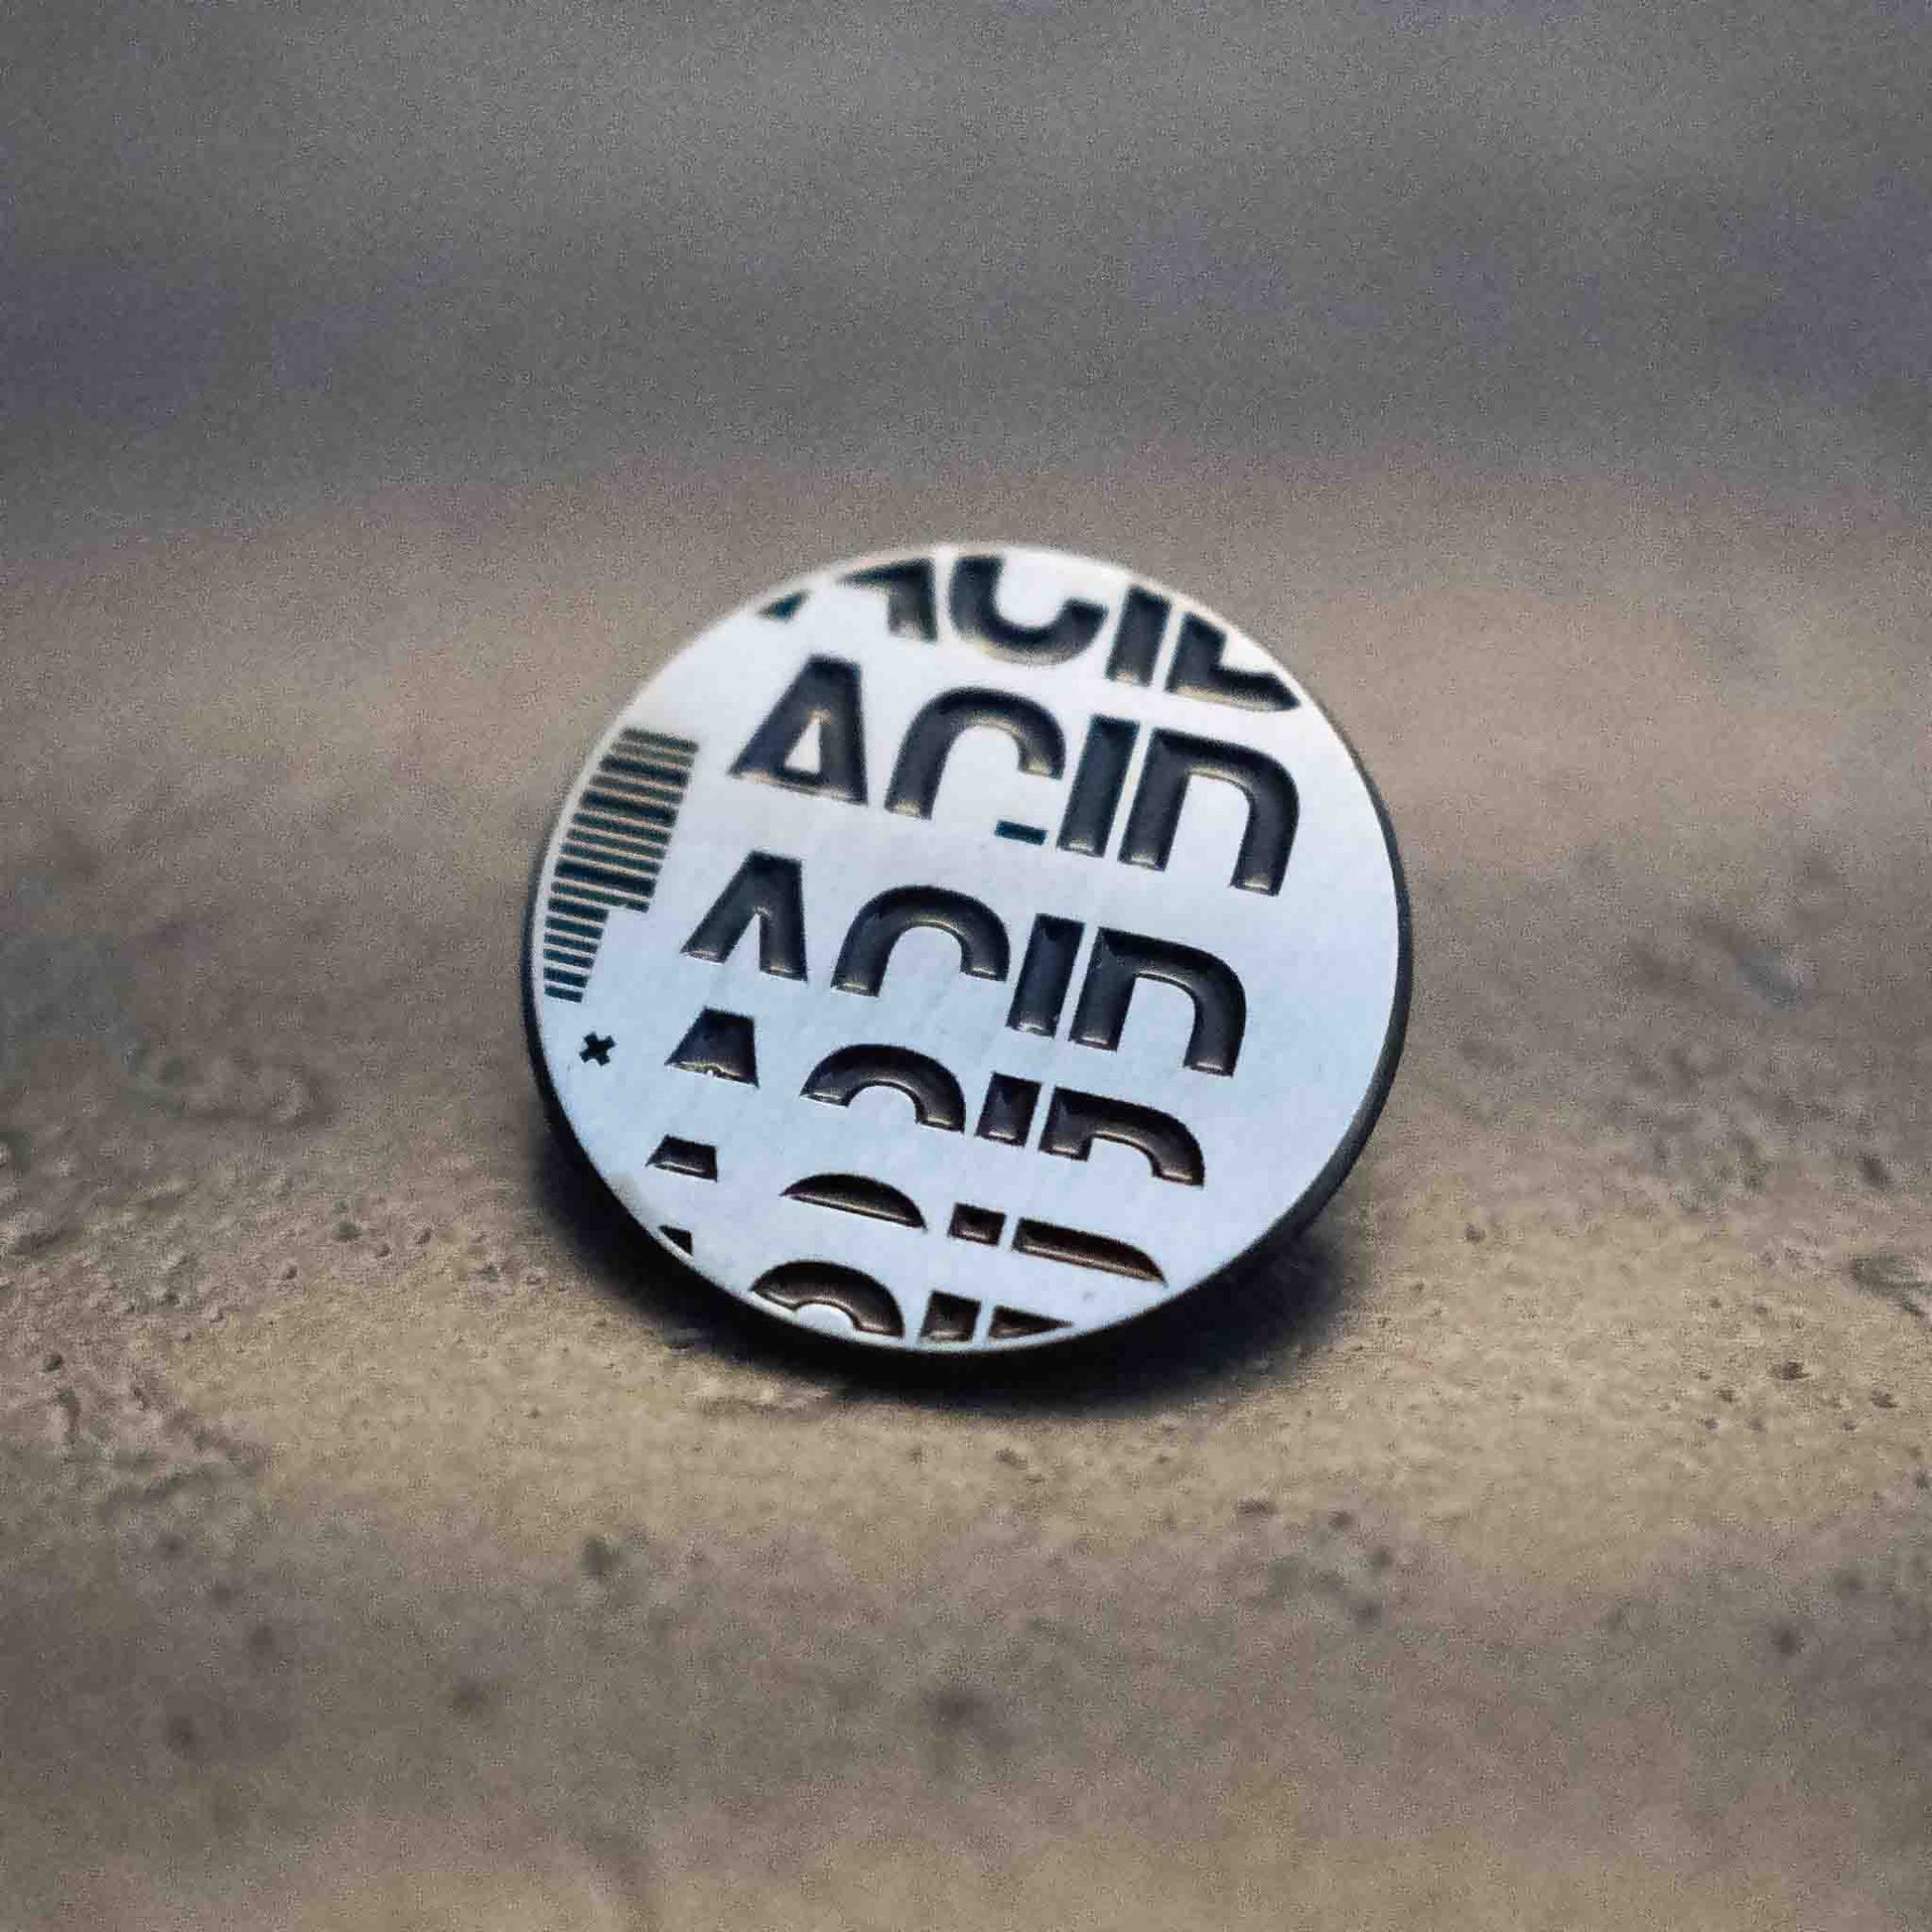 Antique silver with black enamel acid house pin badge